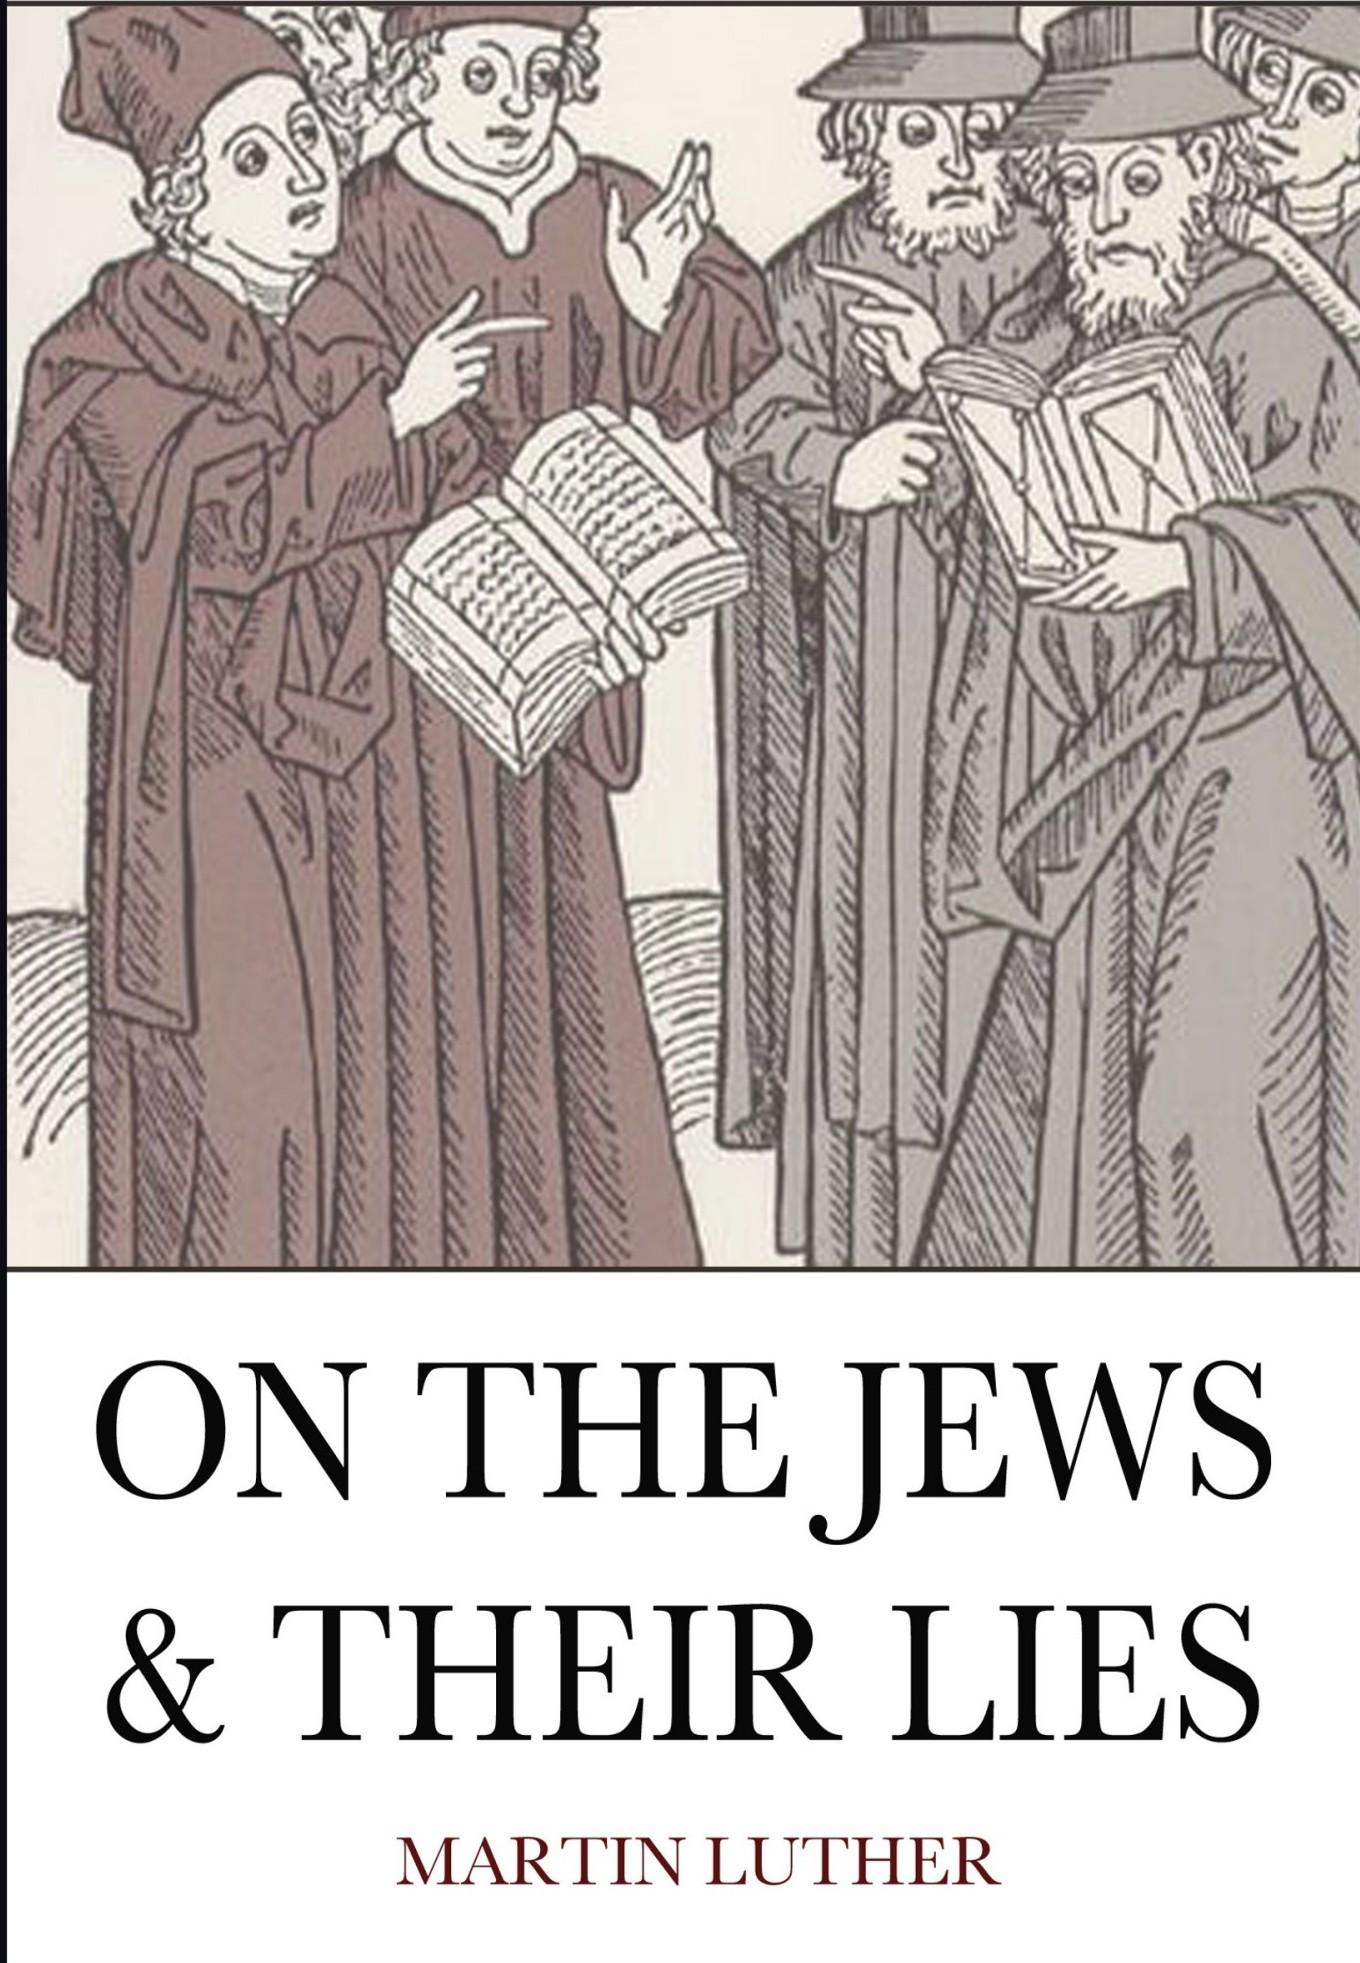 The Jews and Their Lies (1543) by Martin Luther